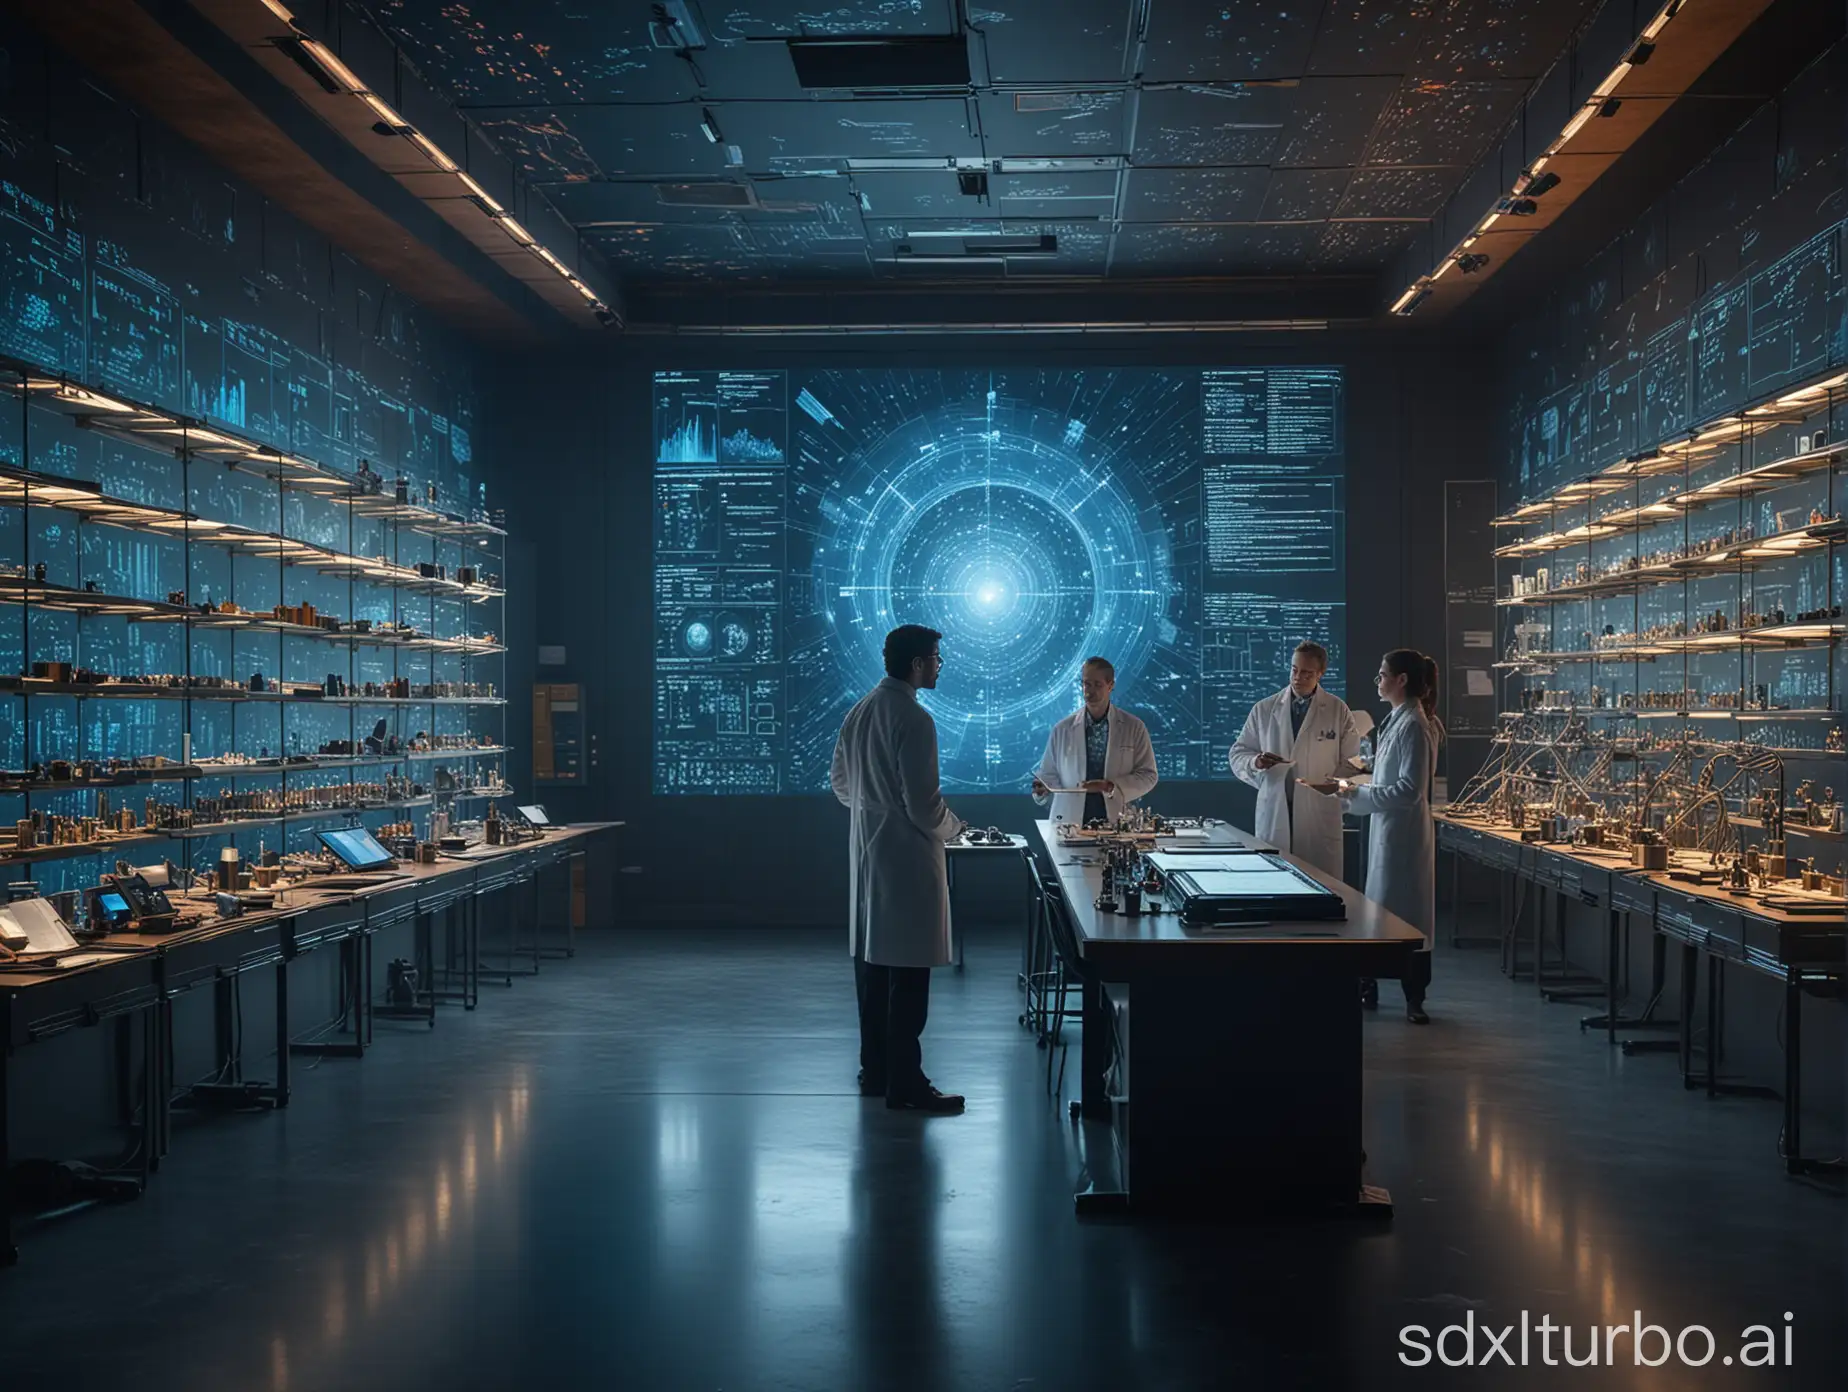 In a futuristic laboratory filled with advanced scientific equipment, a group of physicists is gathered around a large holographic display. The display shows a complex, three-dimensional representation of the Ozma problem, with intricate equations and diagrams floating in mid-air. The room is bathed in a soft, blue light, and the walls are lined with shelves of scientific texts and instruments. The physicists, dressed in sleek, modern lab coats, are deep in discussion, their faces illuminated by the glow of the holograms. Outside the laboratory's large windows, a breathtaking view of a distant galaxy can be seen, adding to the sense of wonder and discovery. The scene captures the essence of the Ozma problem as one of the quintessential challenges in physics, highlighting the blend of human ingenuity and the vast mysteries of the universe. HDR,UHD,8K,best quality,absurdres,masterpiece,Highly detailed,ultra-fine painting,physically-based rendering,extreme detail description,Professional,Vivid Colors,cinematic,cinematic_lighting